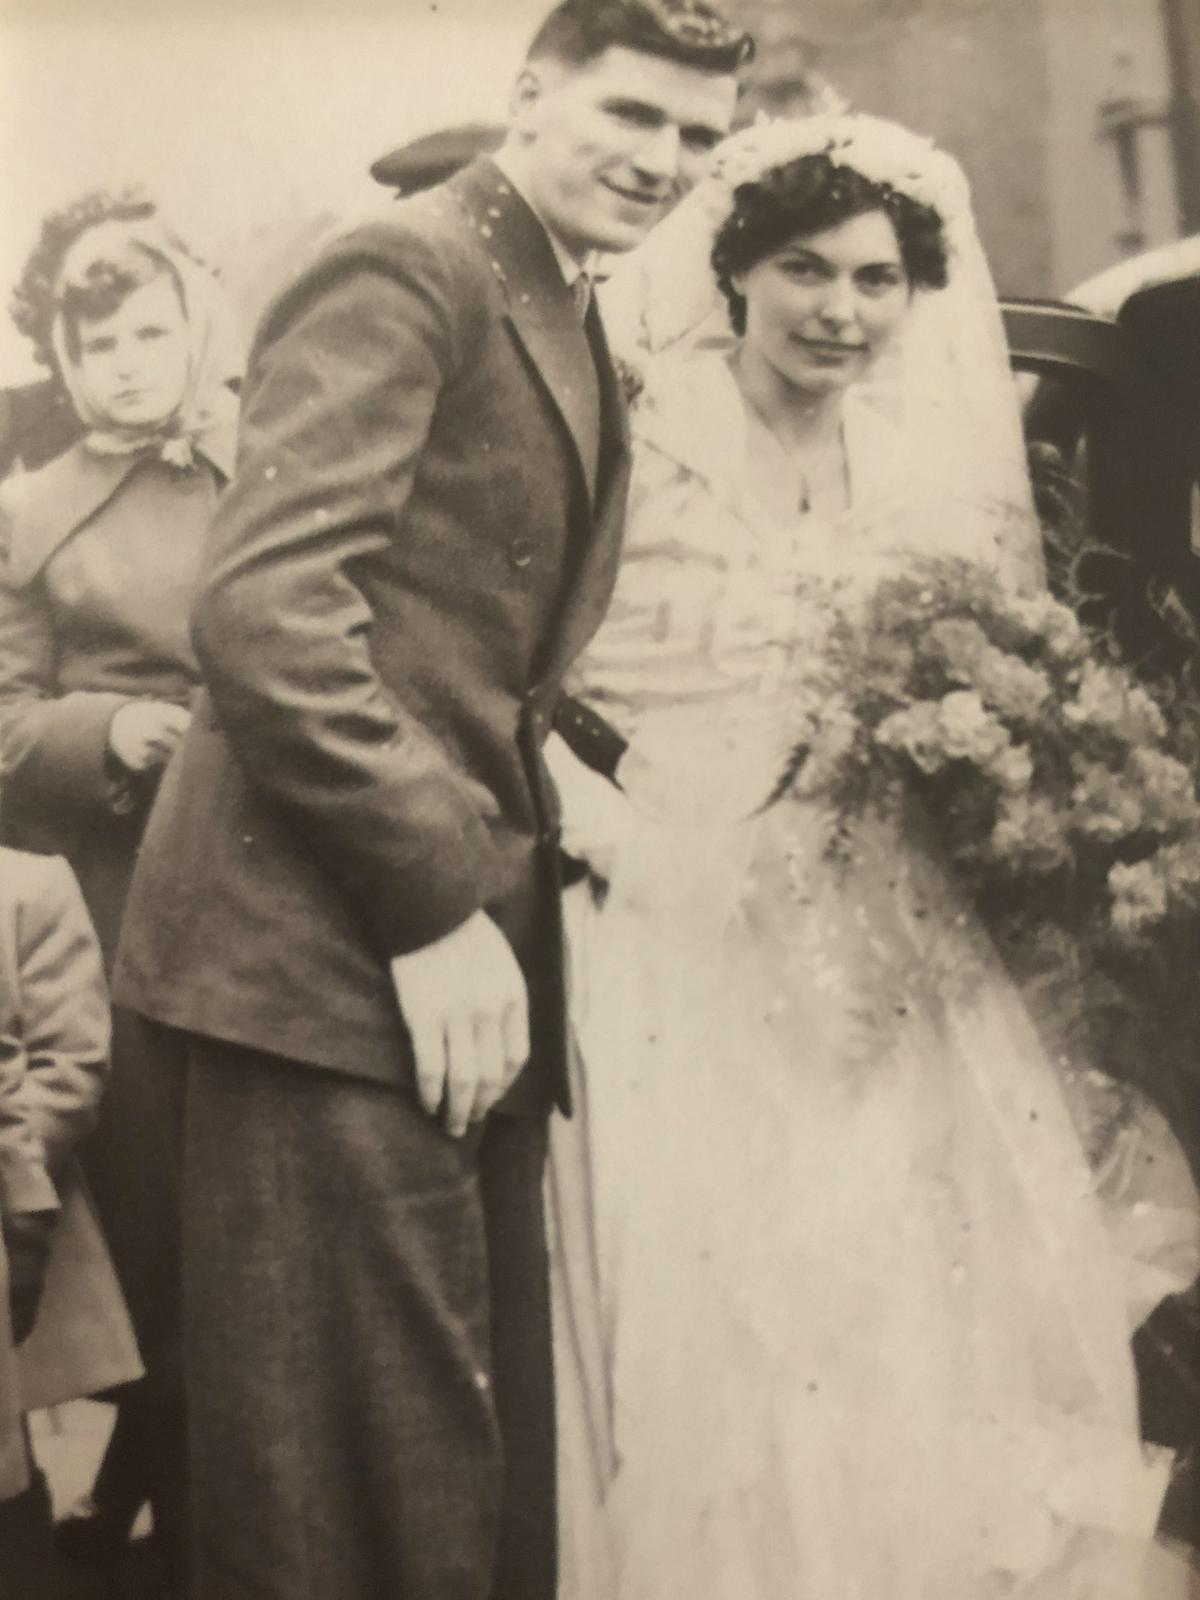 Wilfred and Iris Miles on their wedding day. (Caters News)